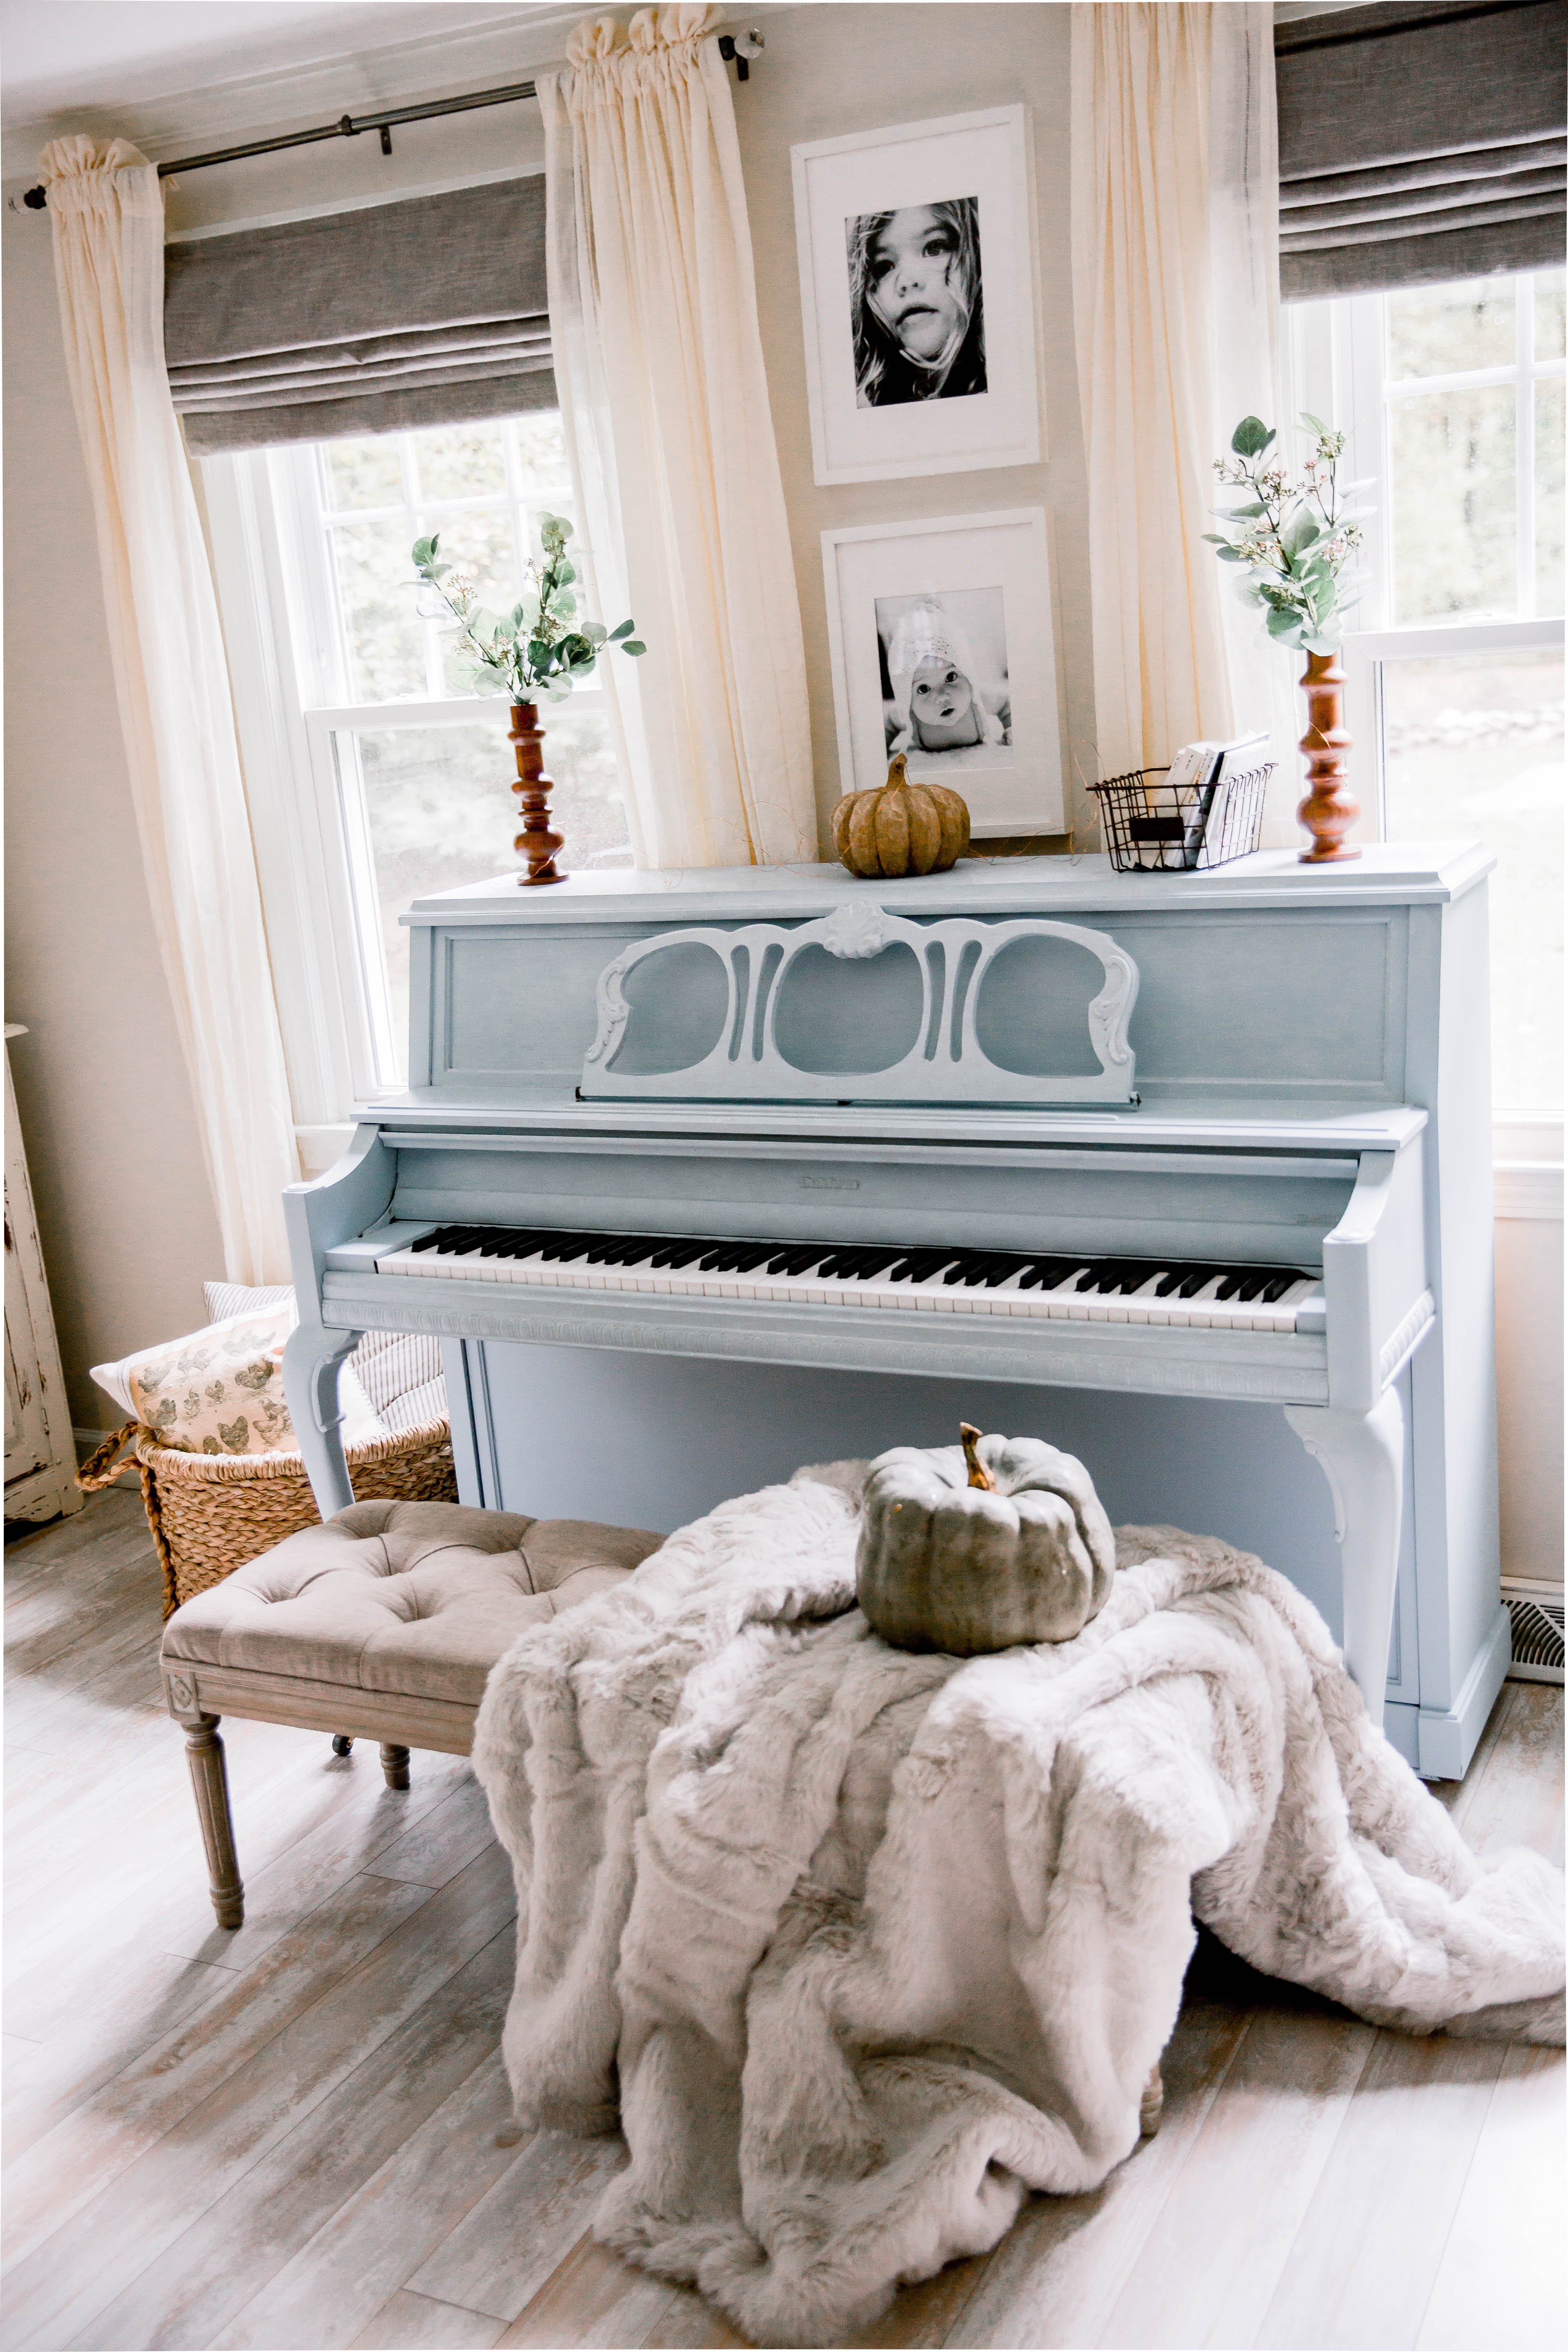 How to Paint a Piano | A quick and easy way to transform that wooden piano to any color you want!